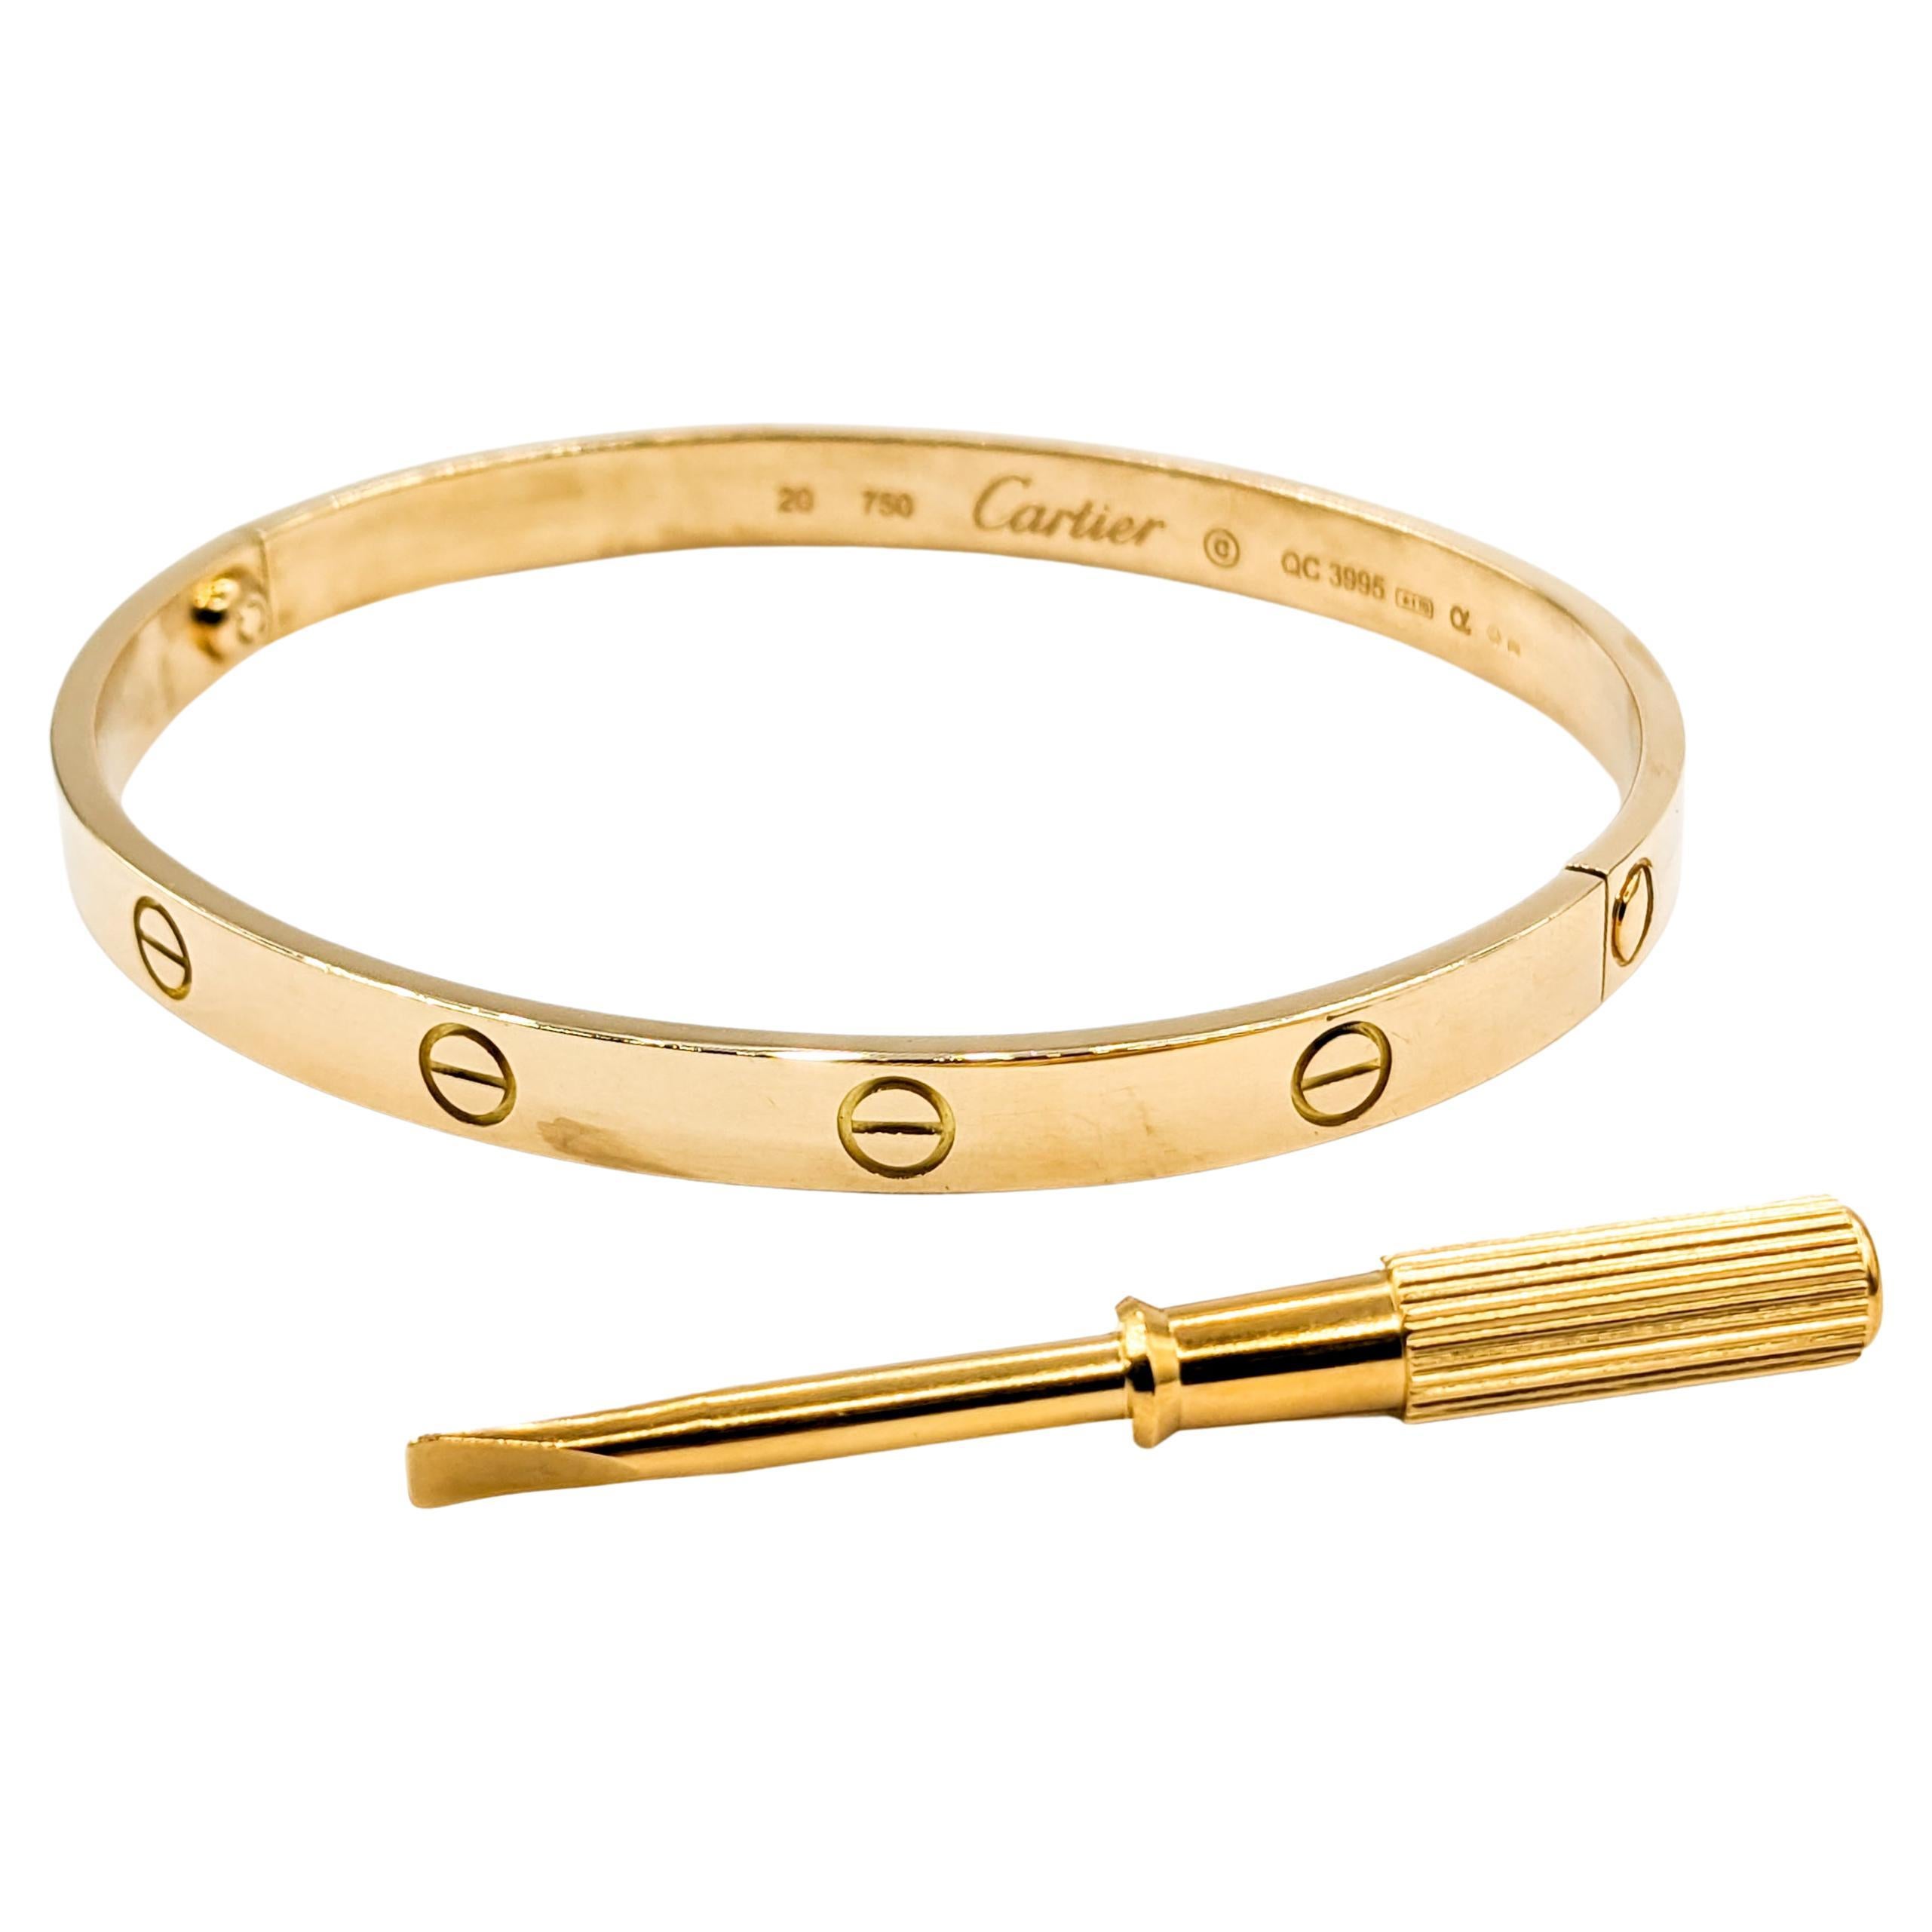 Cartier Love Bracelet 18kt Yellow Gold Size 20

Introducing the iconic Cartier Love bracelet, a testament to both style and romance, finely crafted in radiant 18kt yellow gold. This piece encapsulates timeless elegance, exuding a luminous sheen that